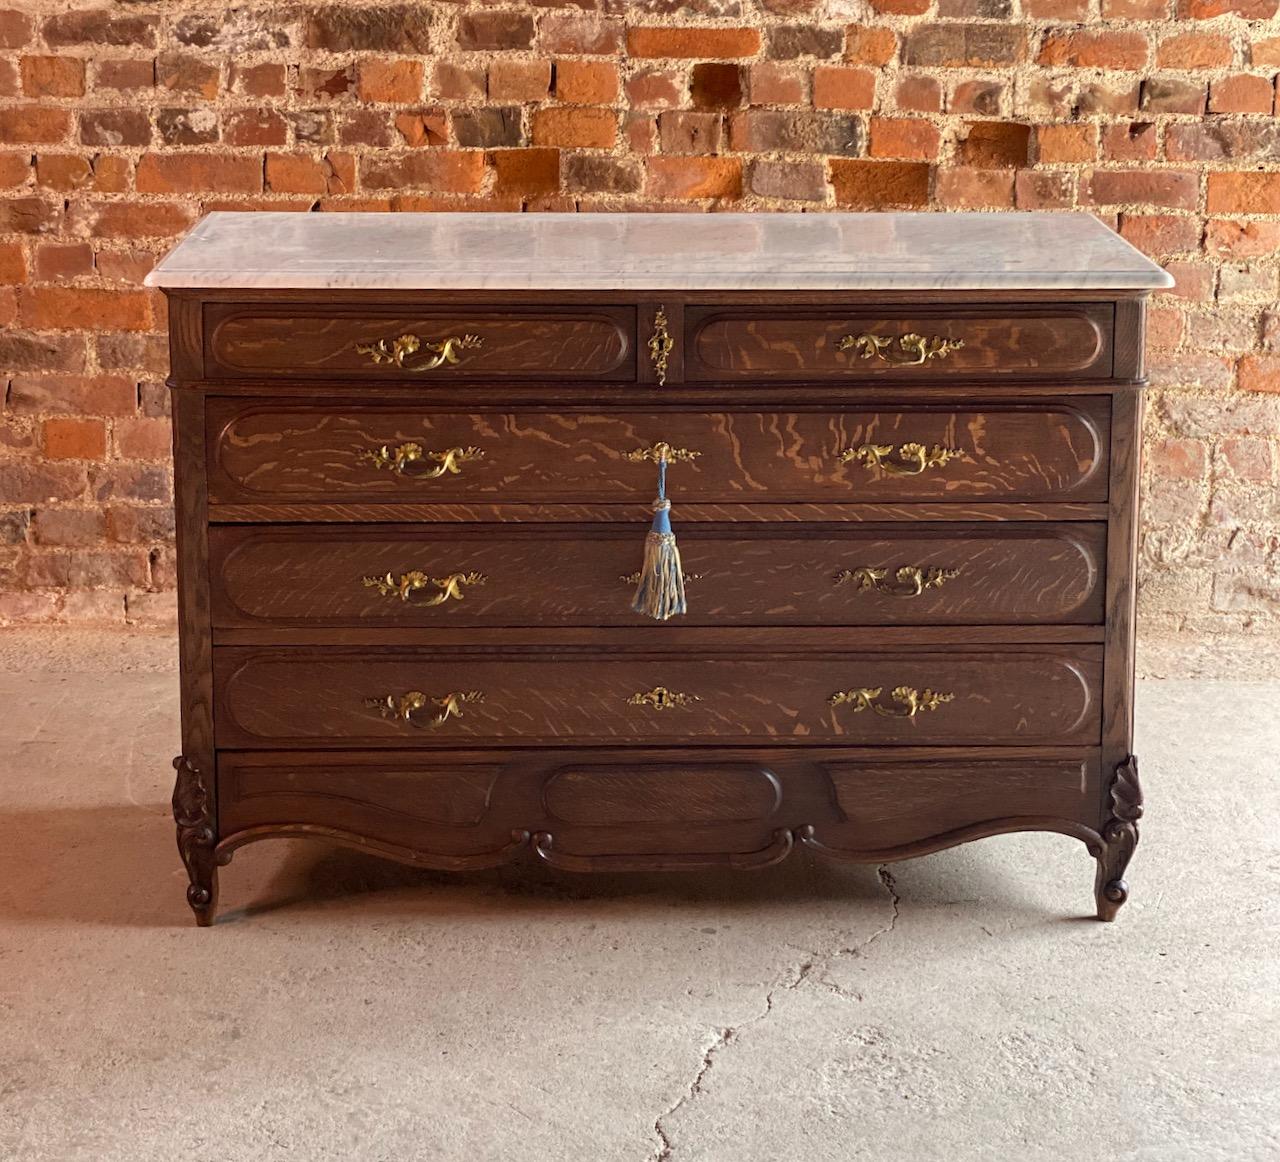 Antique Napoleon III marble commode chest of drawers, France circa 1870 Number 4

A beautiful large antique Napoleon III marble topped oak commode chest of drawers, circa 1870, this chest dates to the late 19th century from the French Parisian